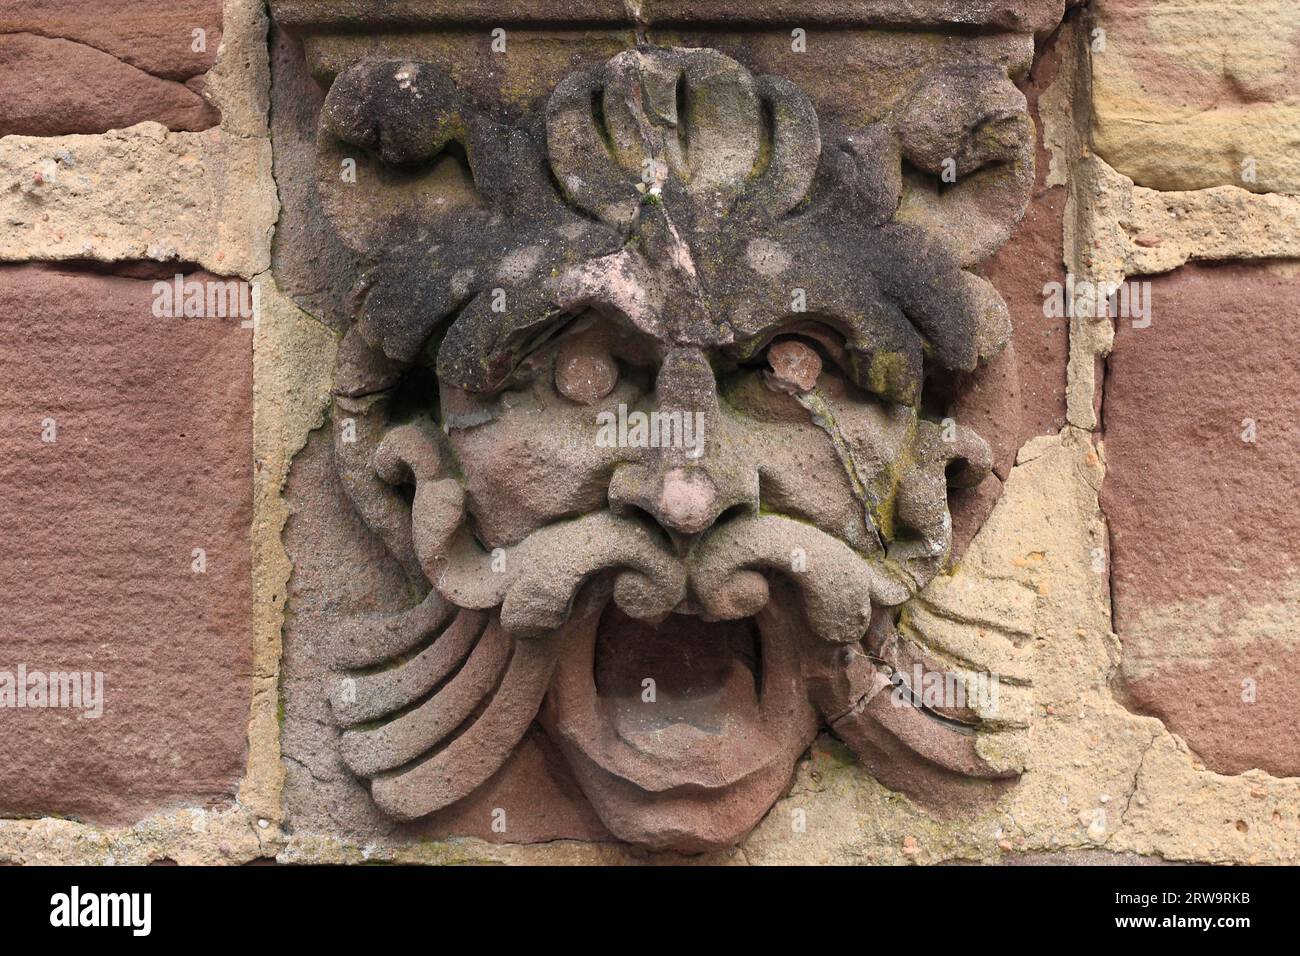 Fantasy figure on a house wall, background wall stones Stock Photo